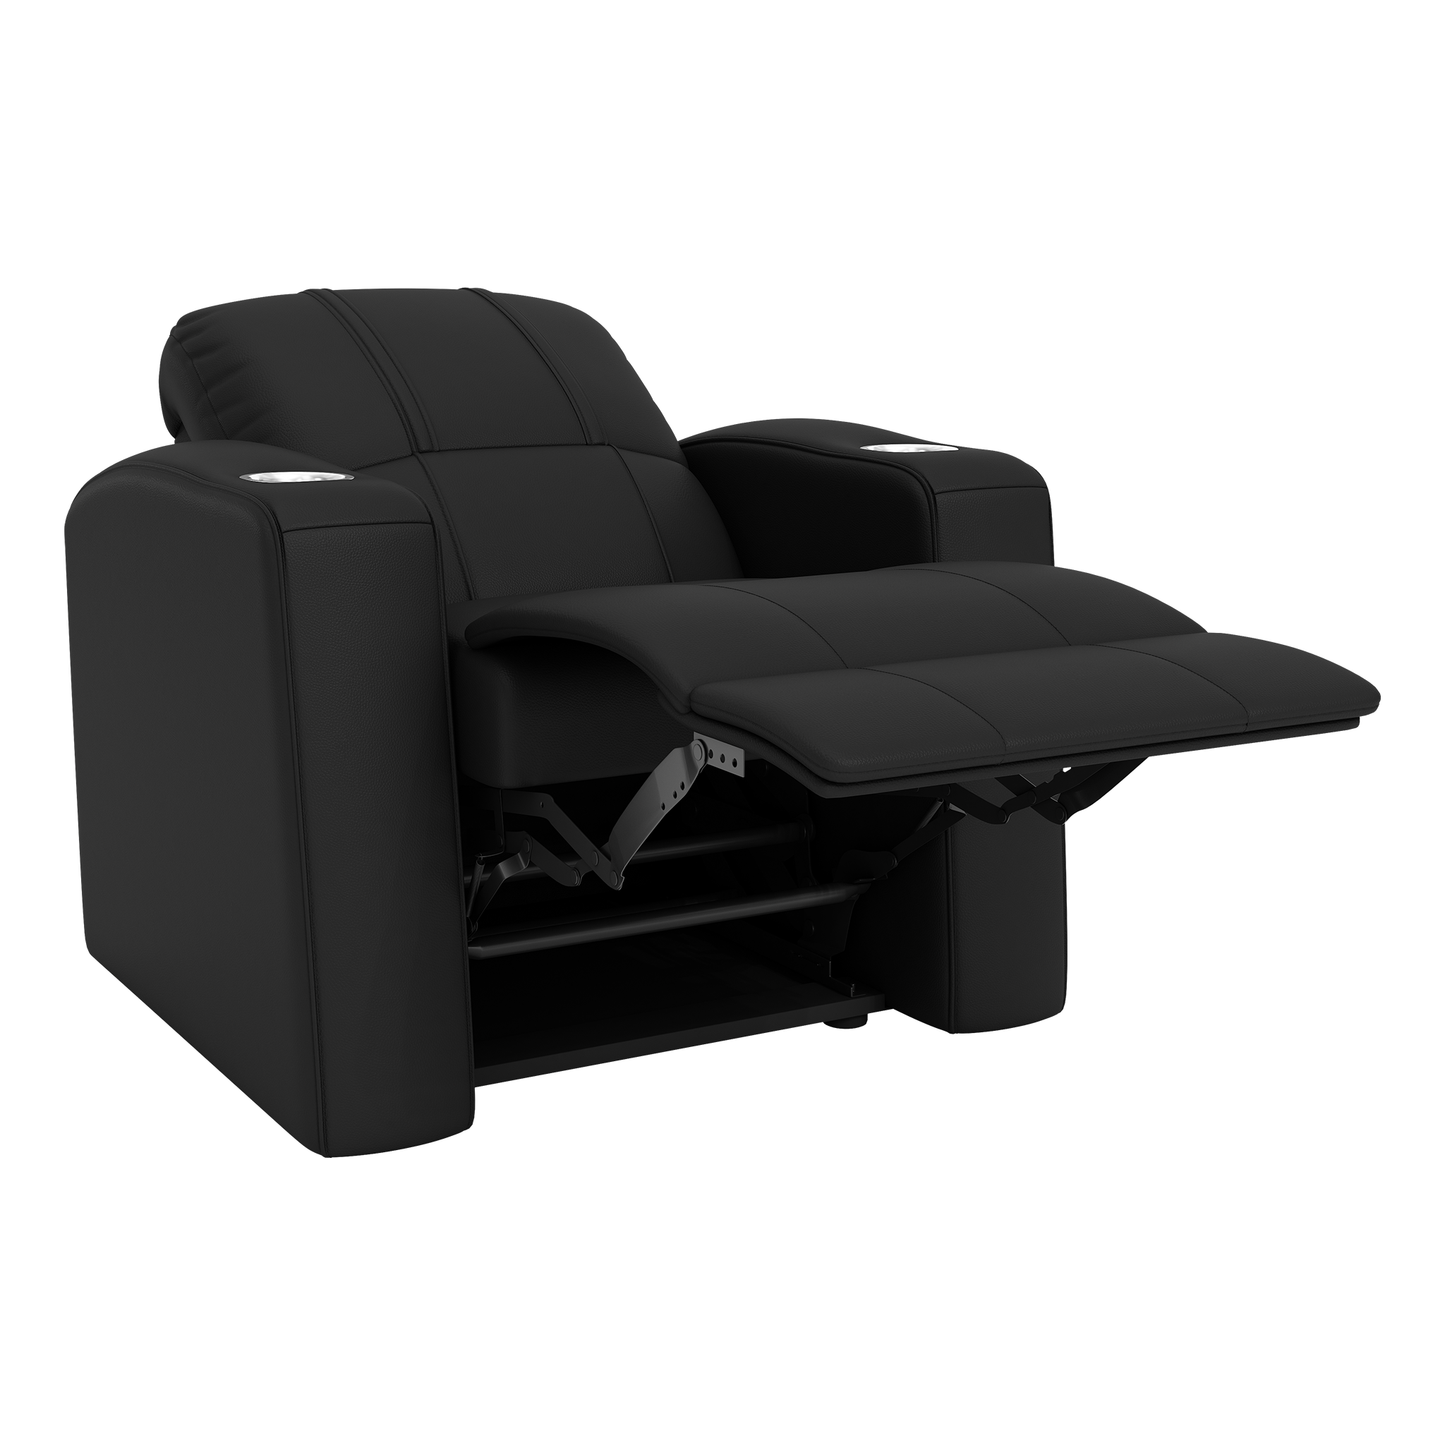 Relax Home Theater Recliner with North Carolina State Logo